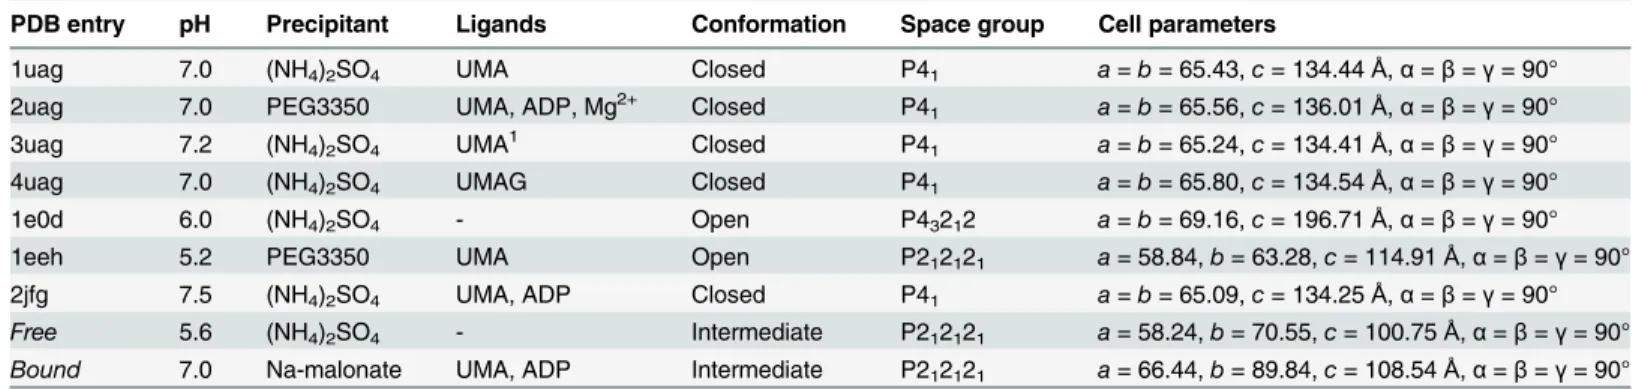 Table 3. Review of E . coli MurD crystallization conditions and its conformations.